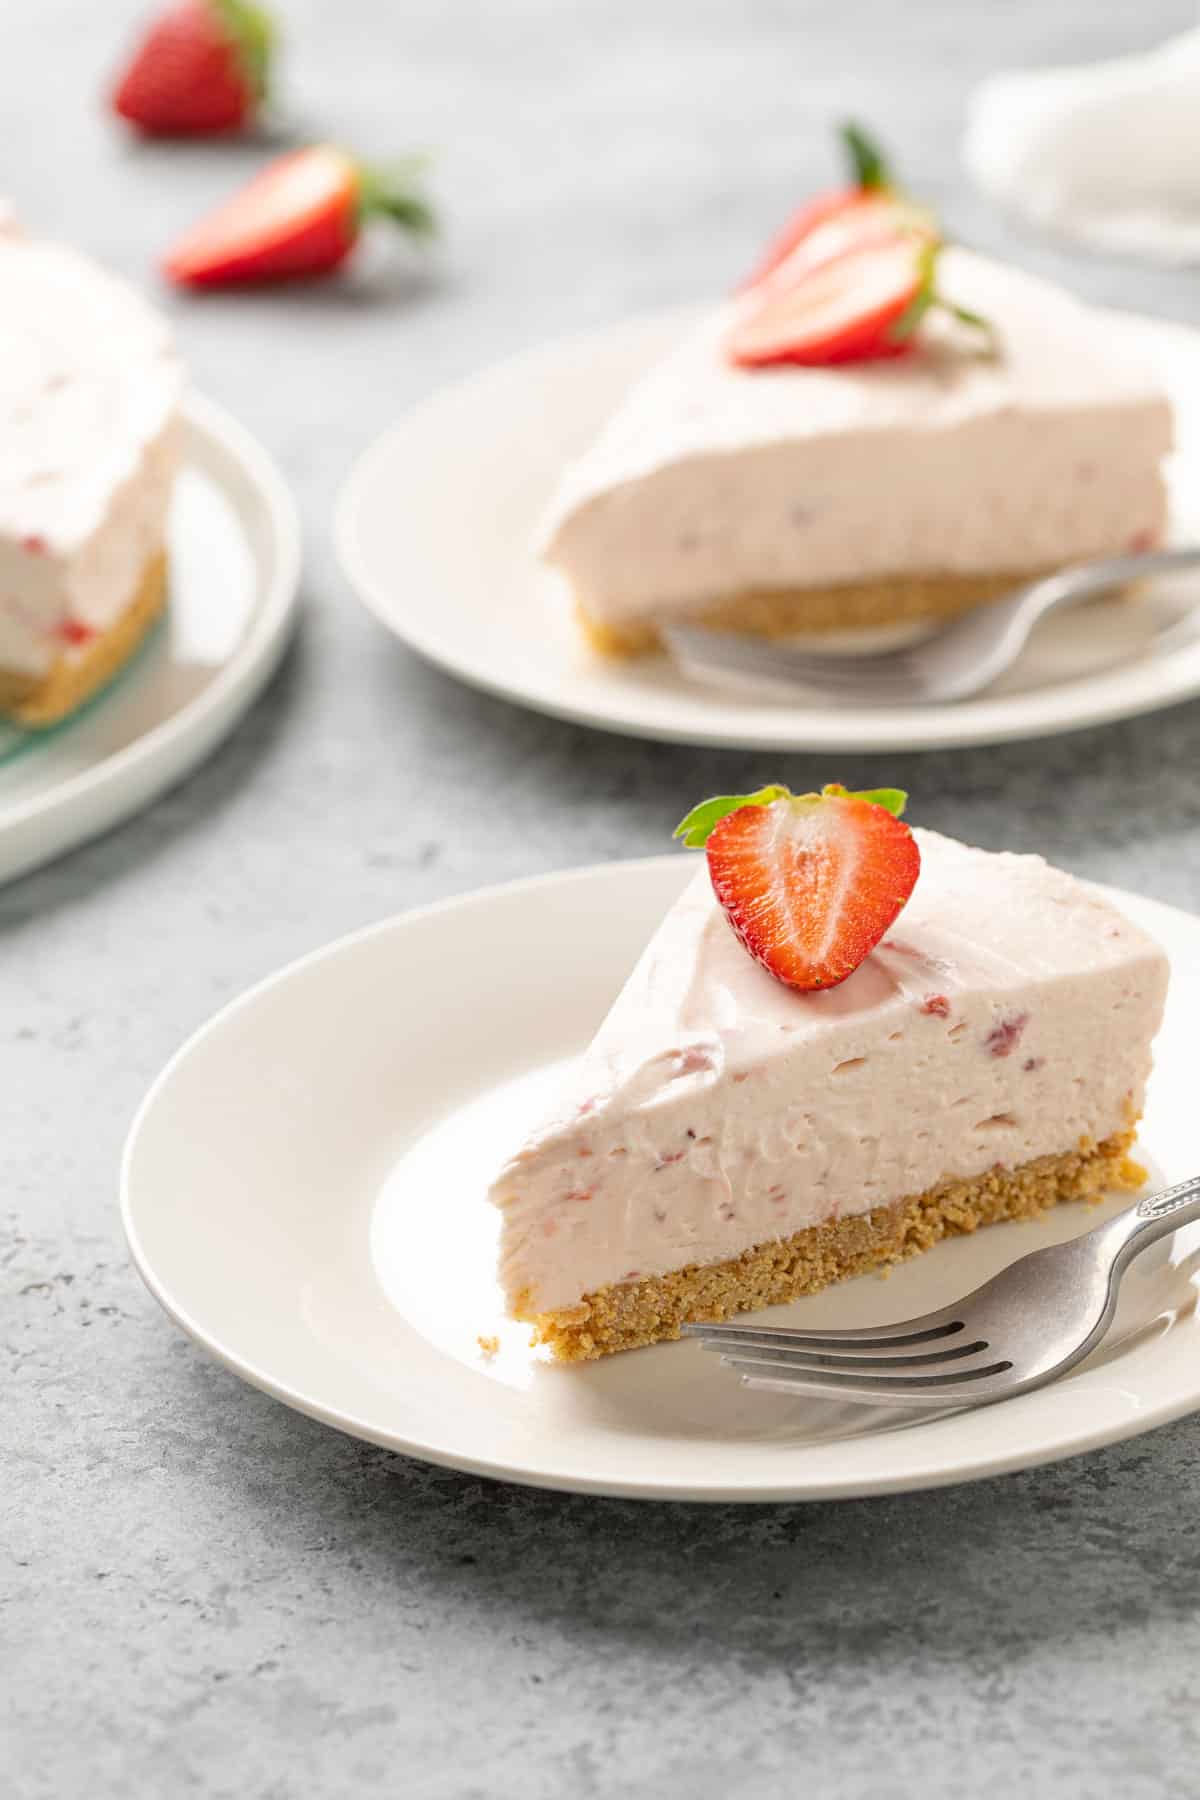 A slice of no bake strawberry cheesecake on a white dessert plate with a fork.